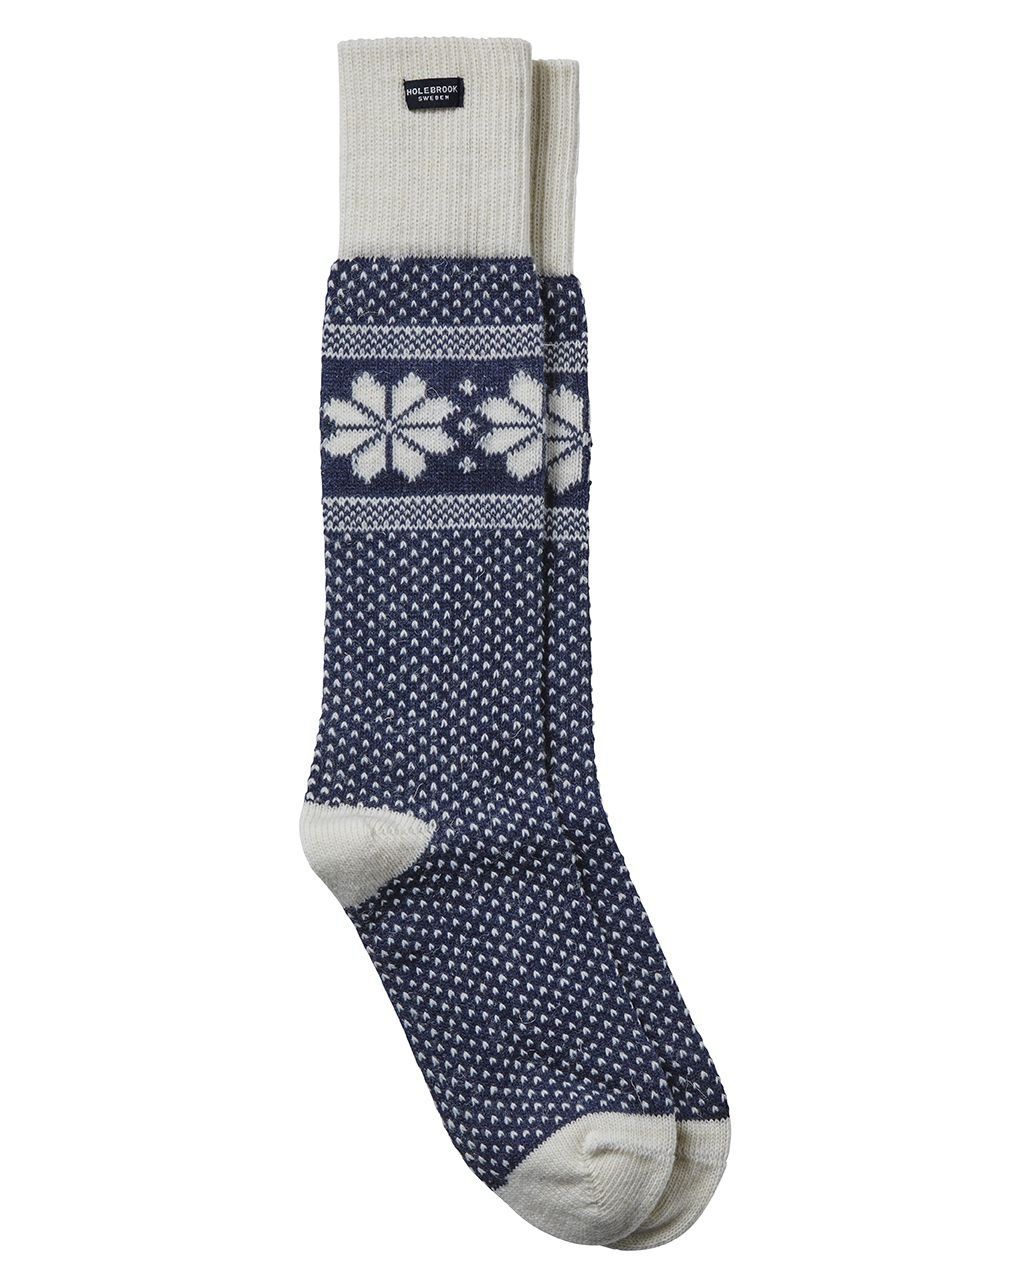 Holebrook Winter Raggsocka in Navy and White 